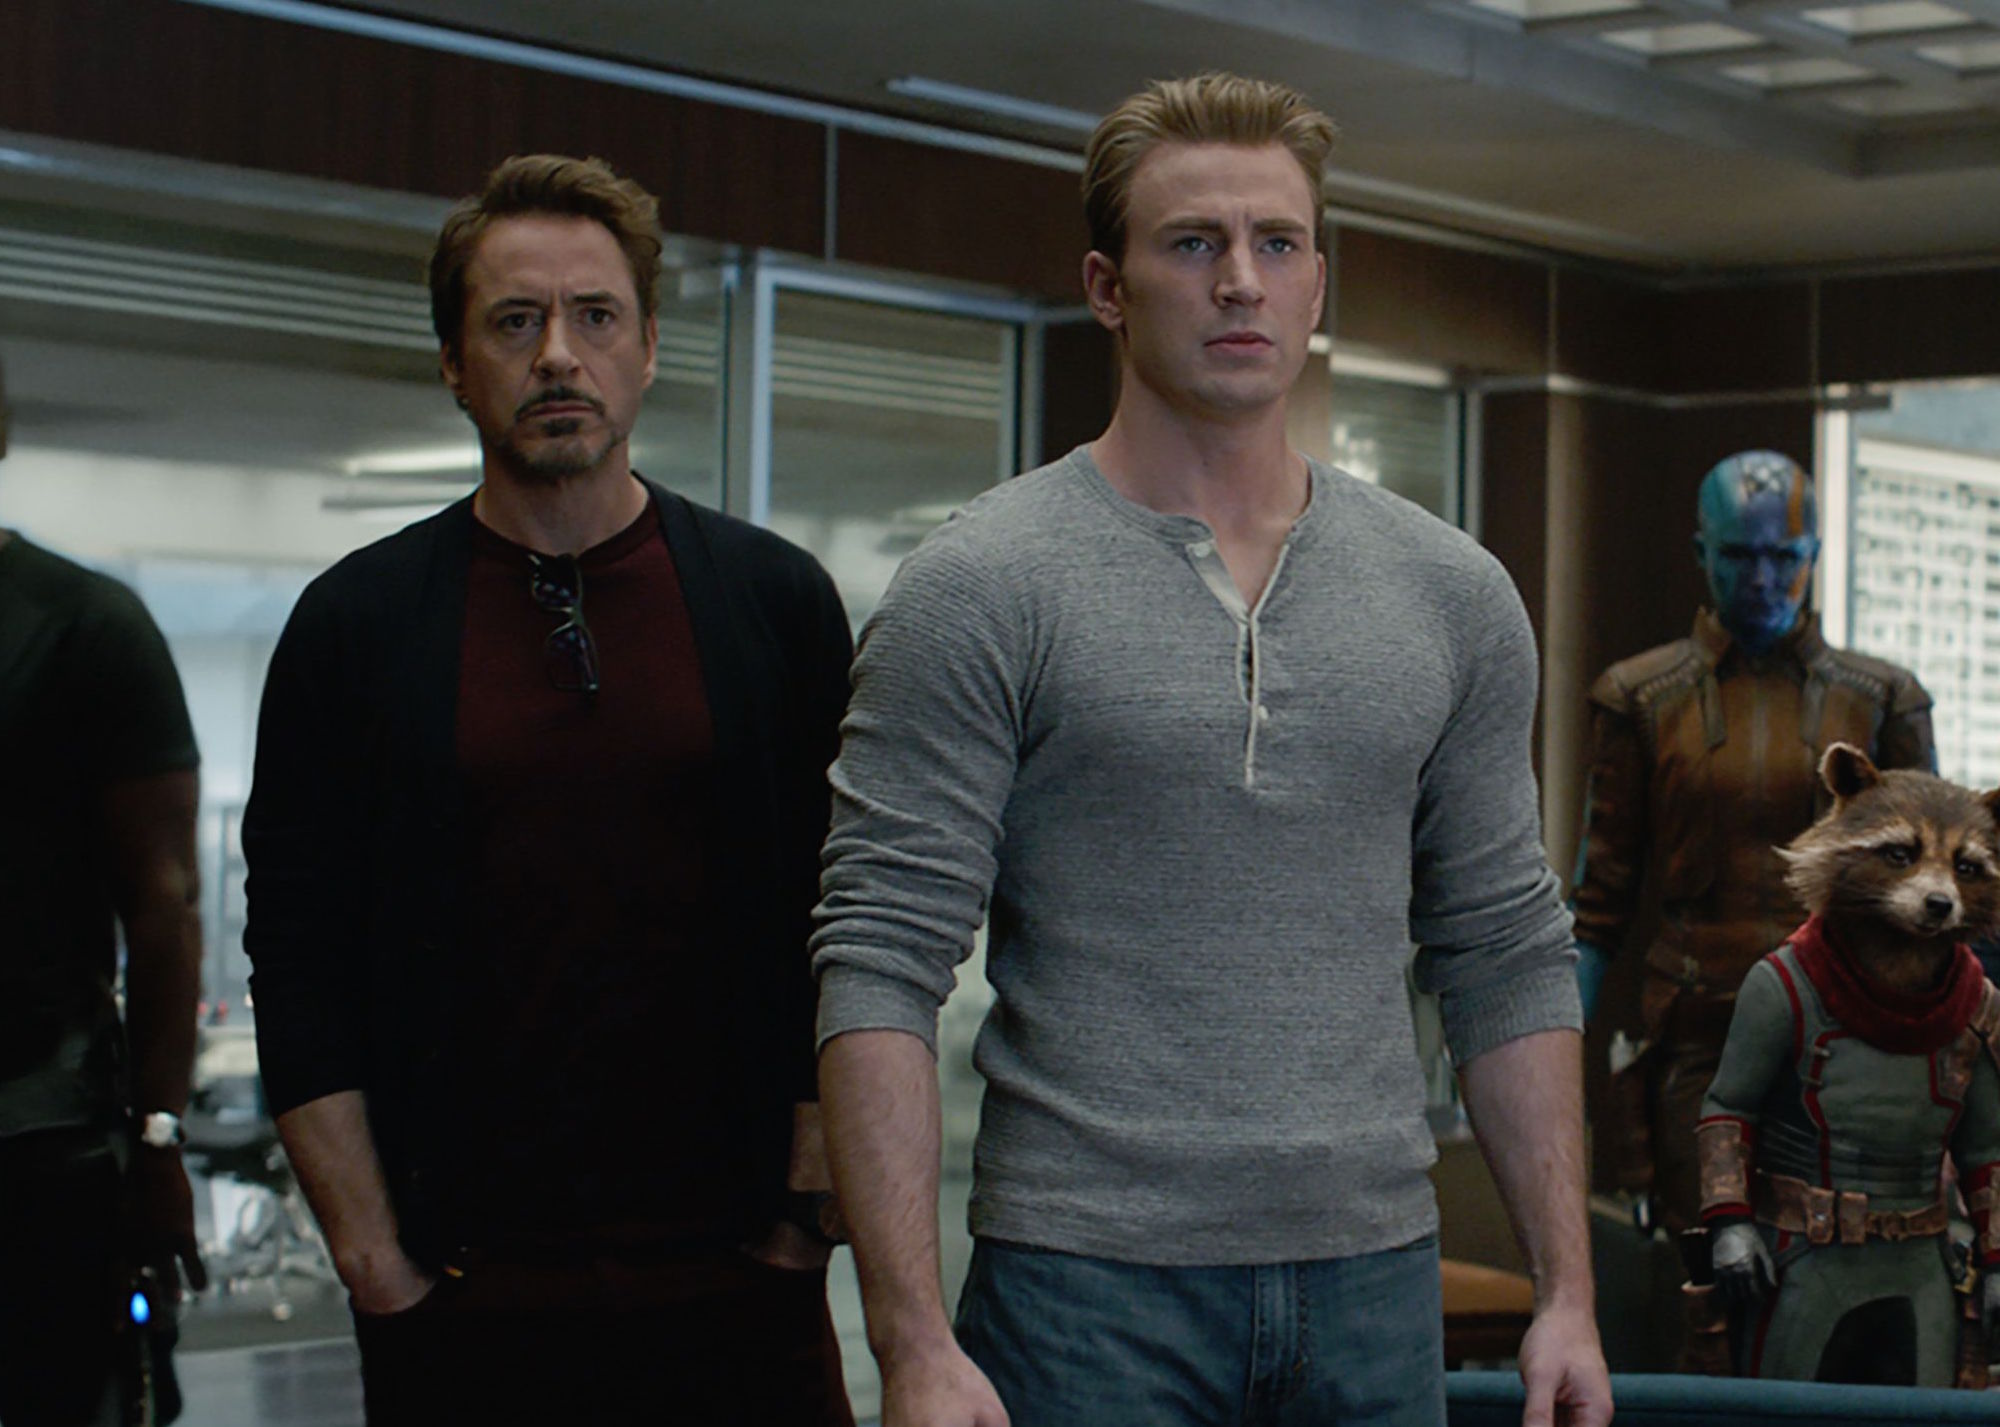 You Need to See Avengers: Endgame Opening Weekend